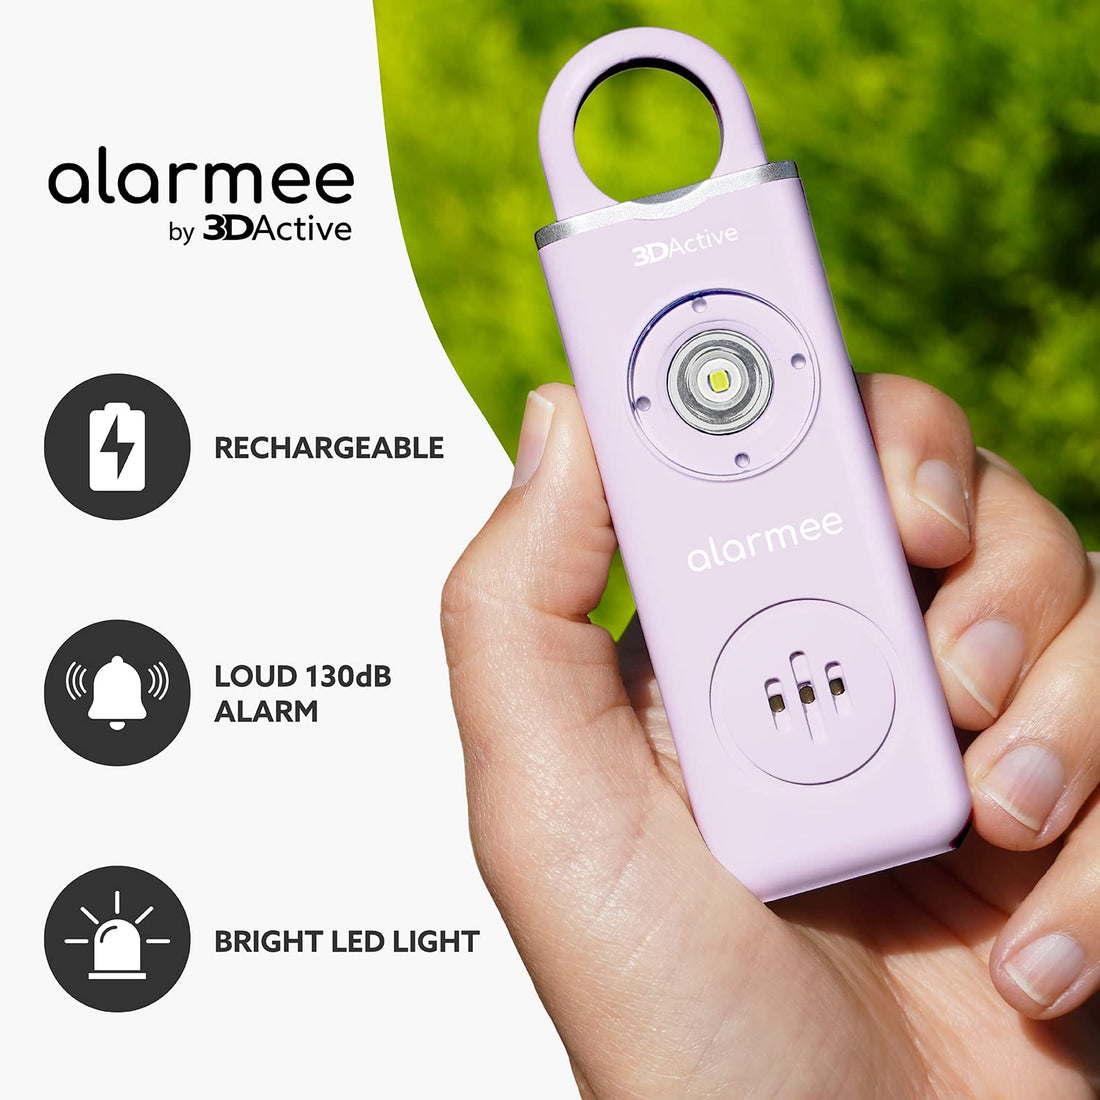 3DActive Alarmee Rechargeable Personal Safety Alarm for Women, Teens and Elderly, Pocket Size 130dB Loud Siren with LED Light (Lavender)